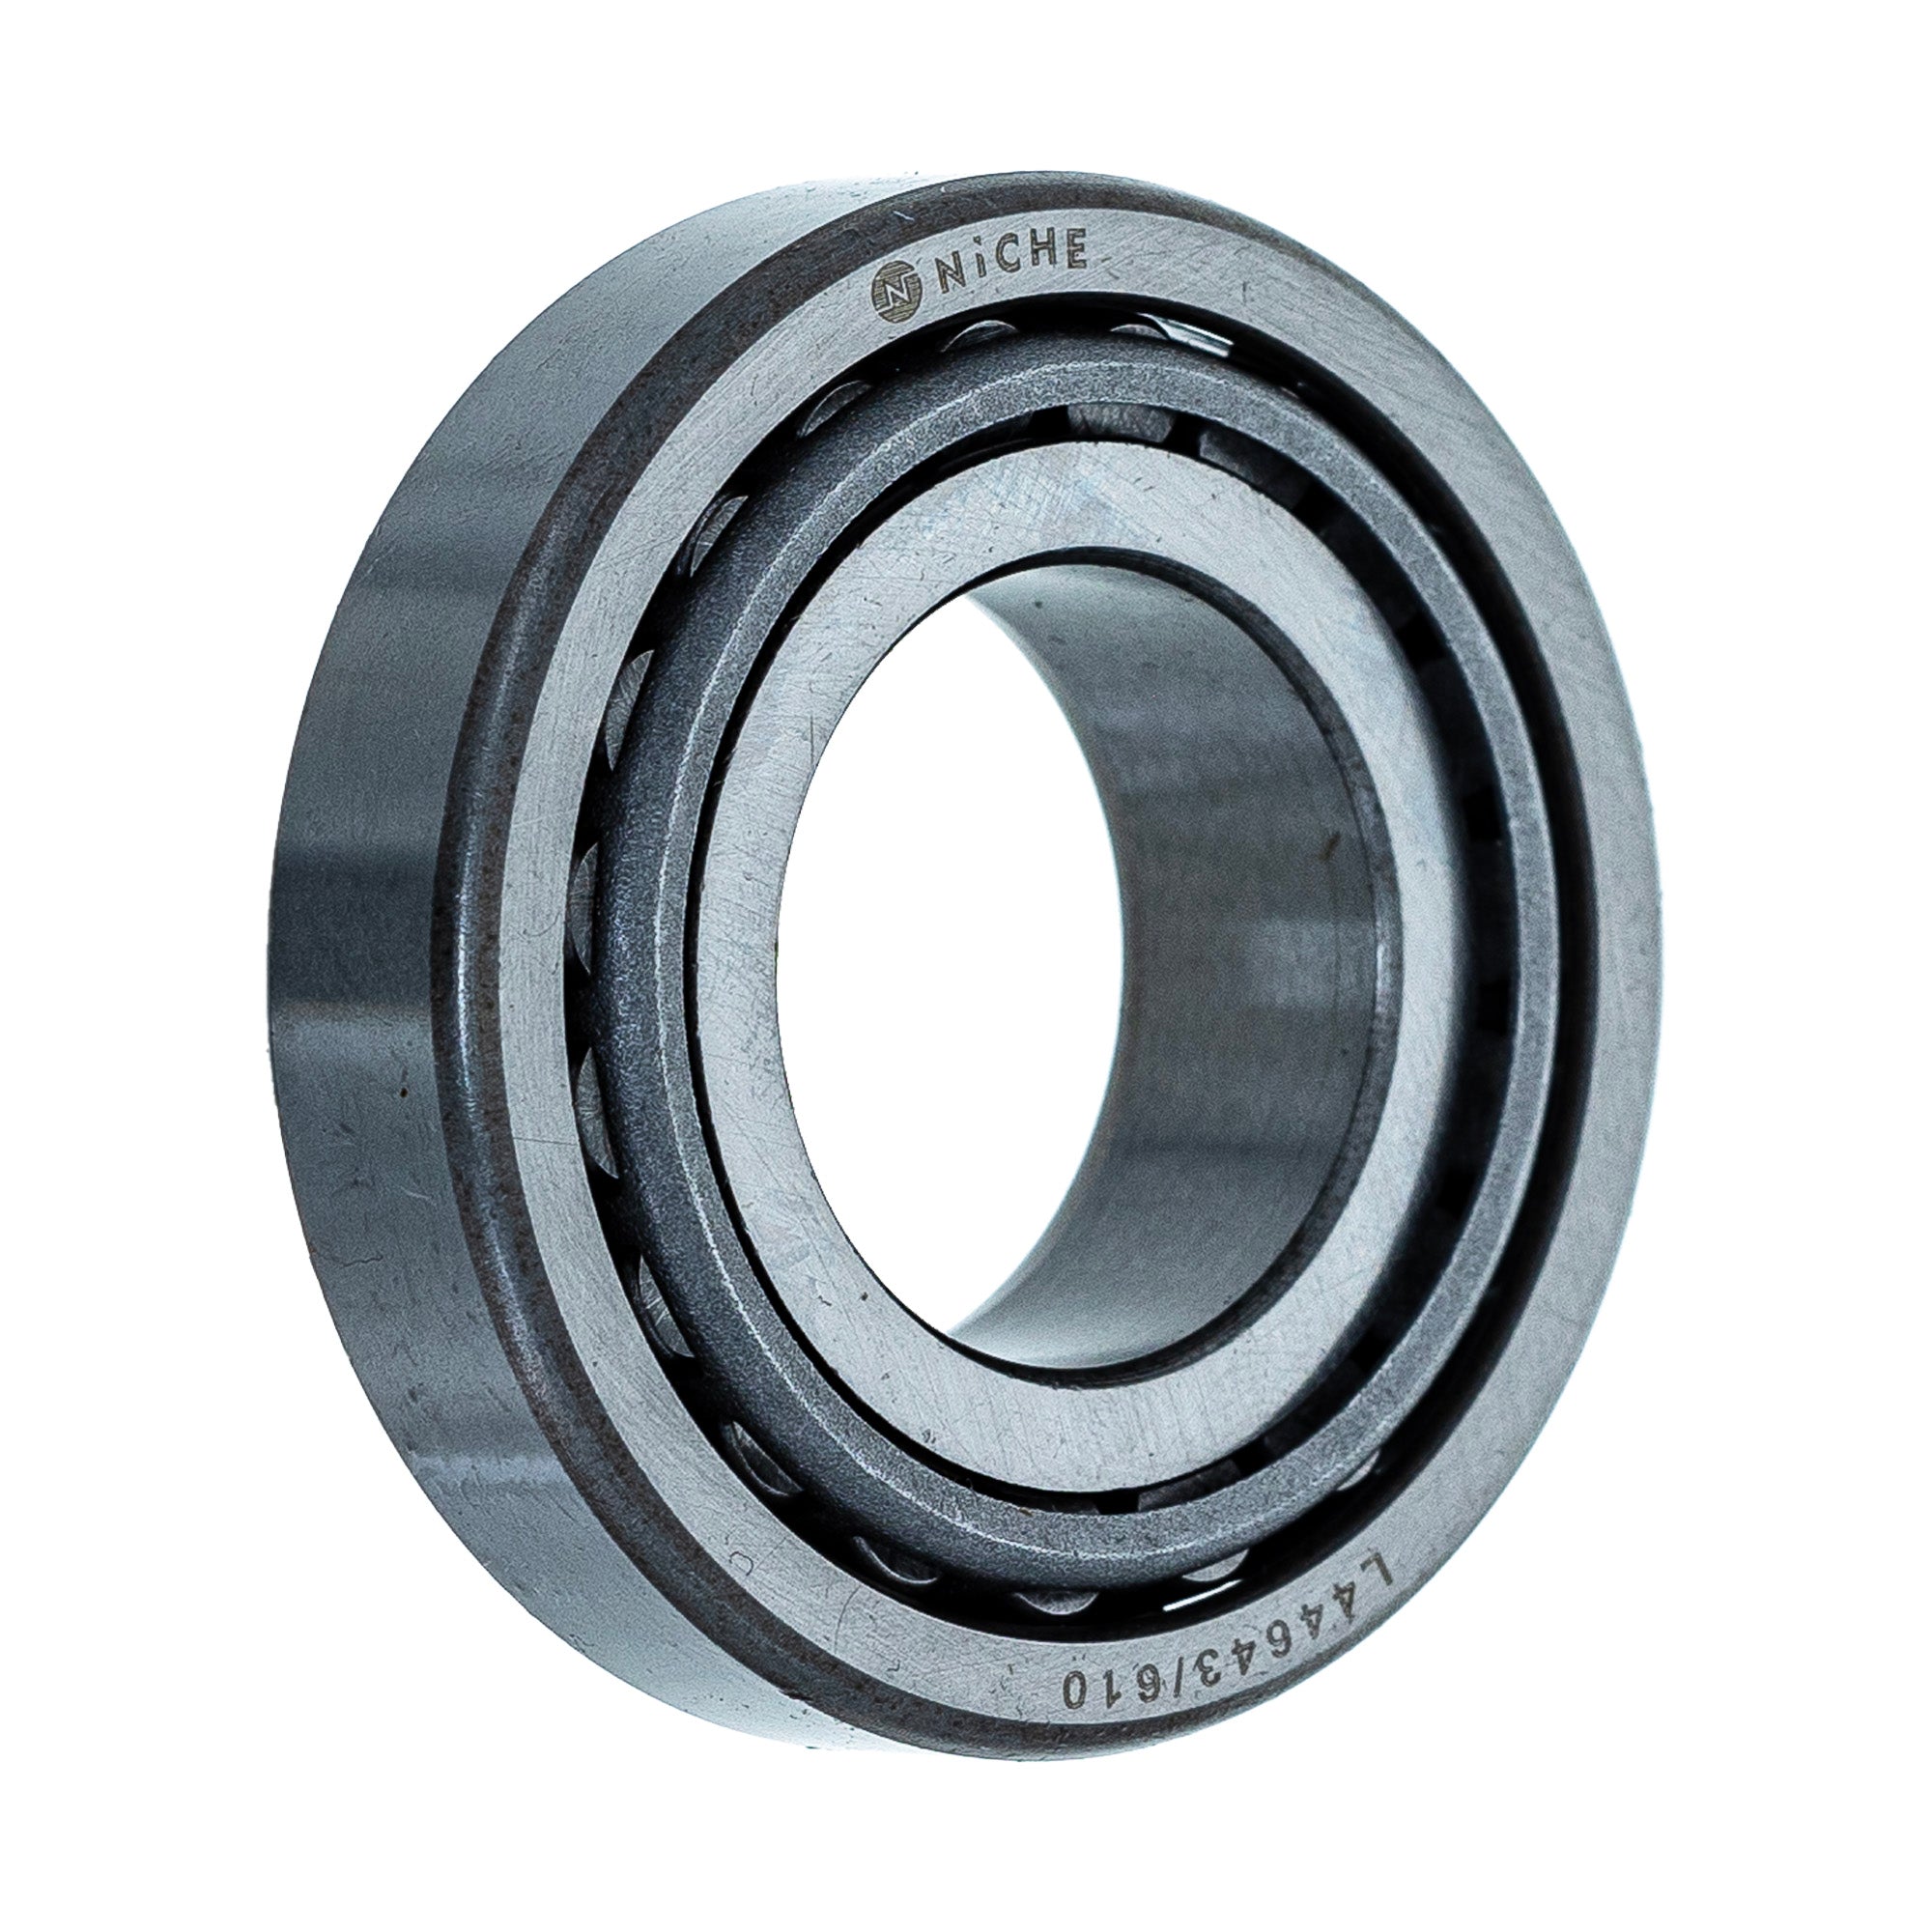 Tapered Roller Bearing for zOTHER Xpress Xplorer Xpedition Worker NICHE 519-CBB2240R